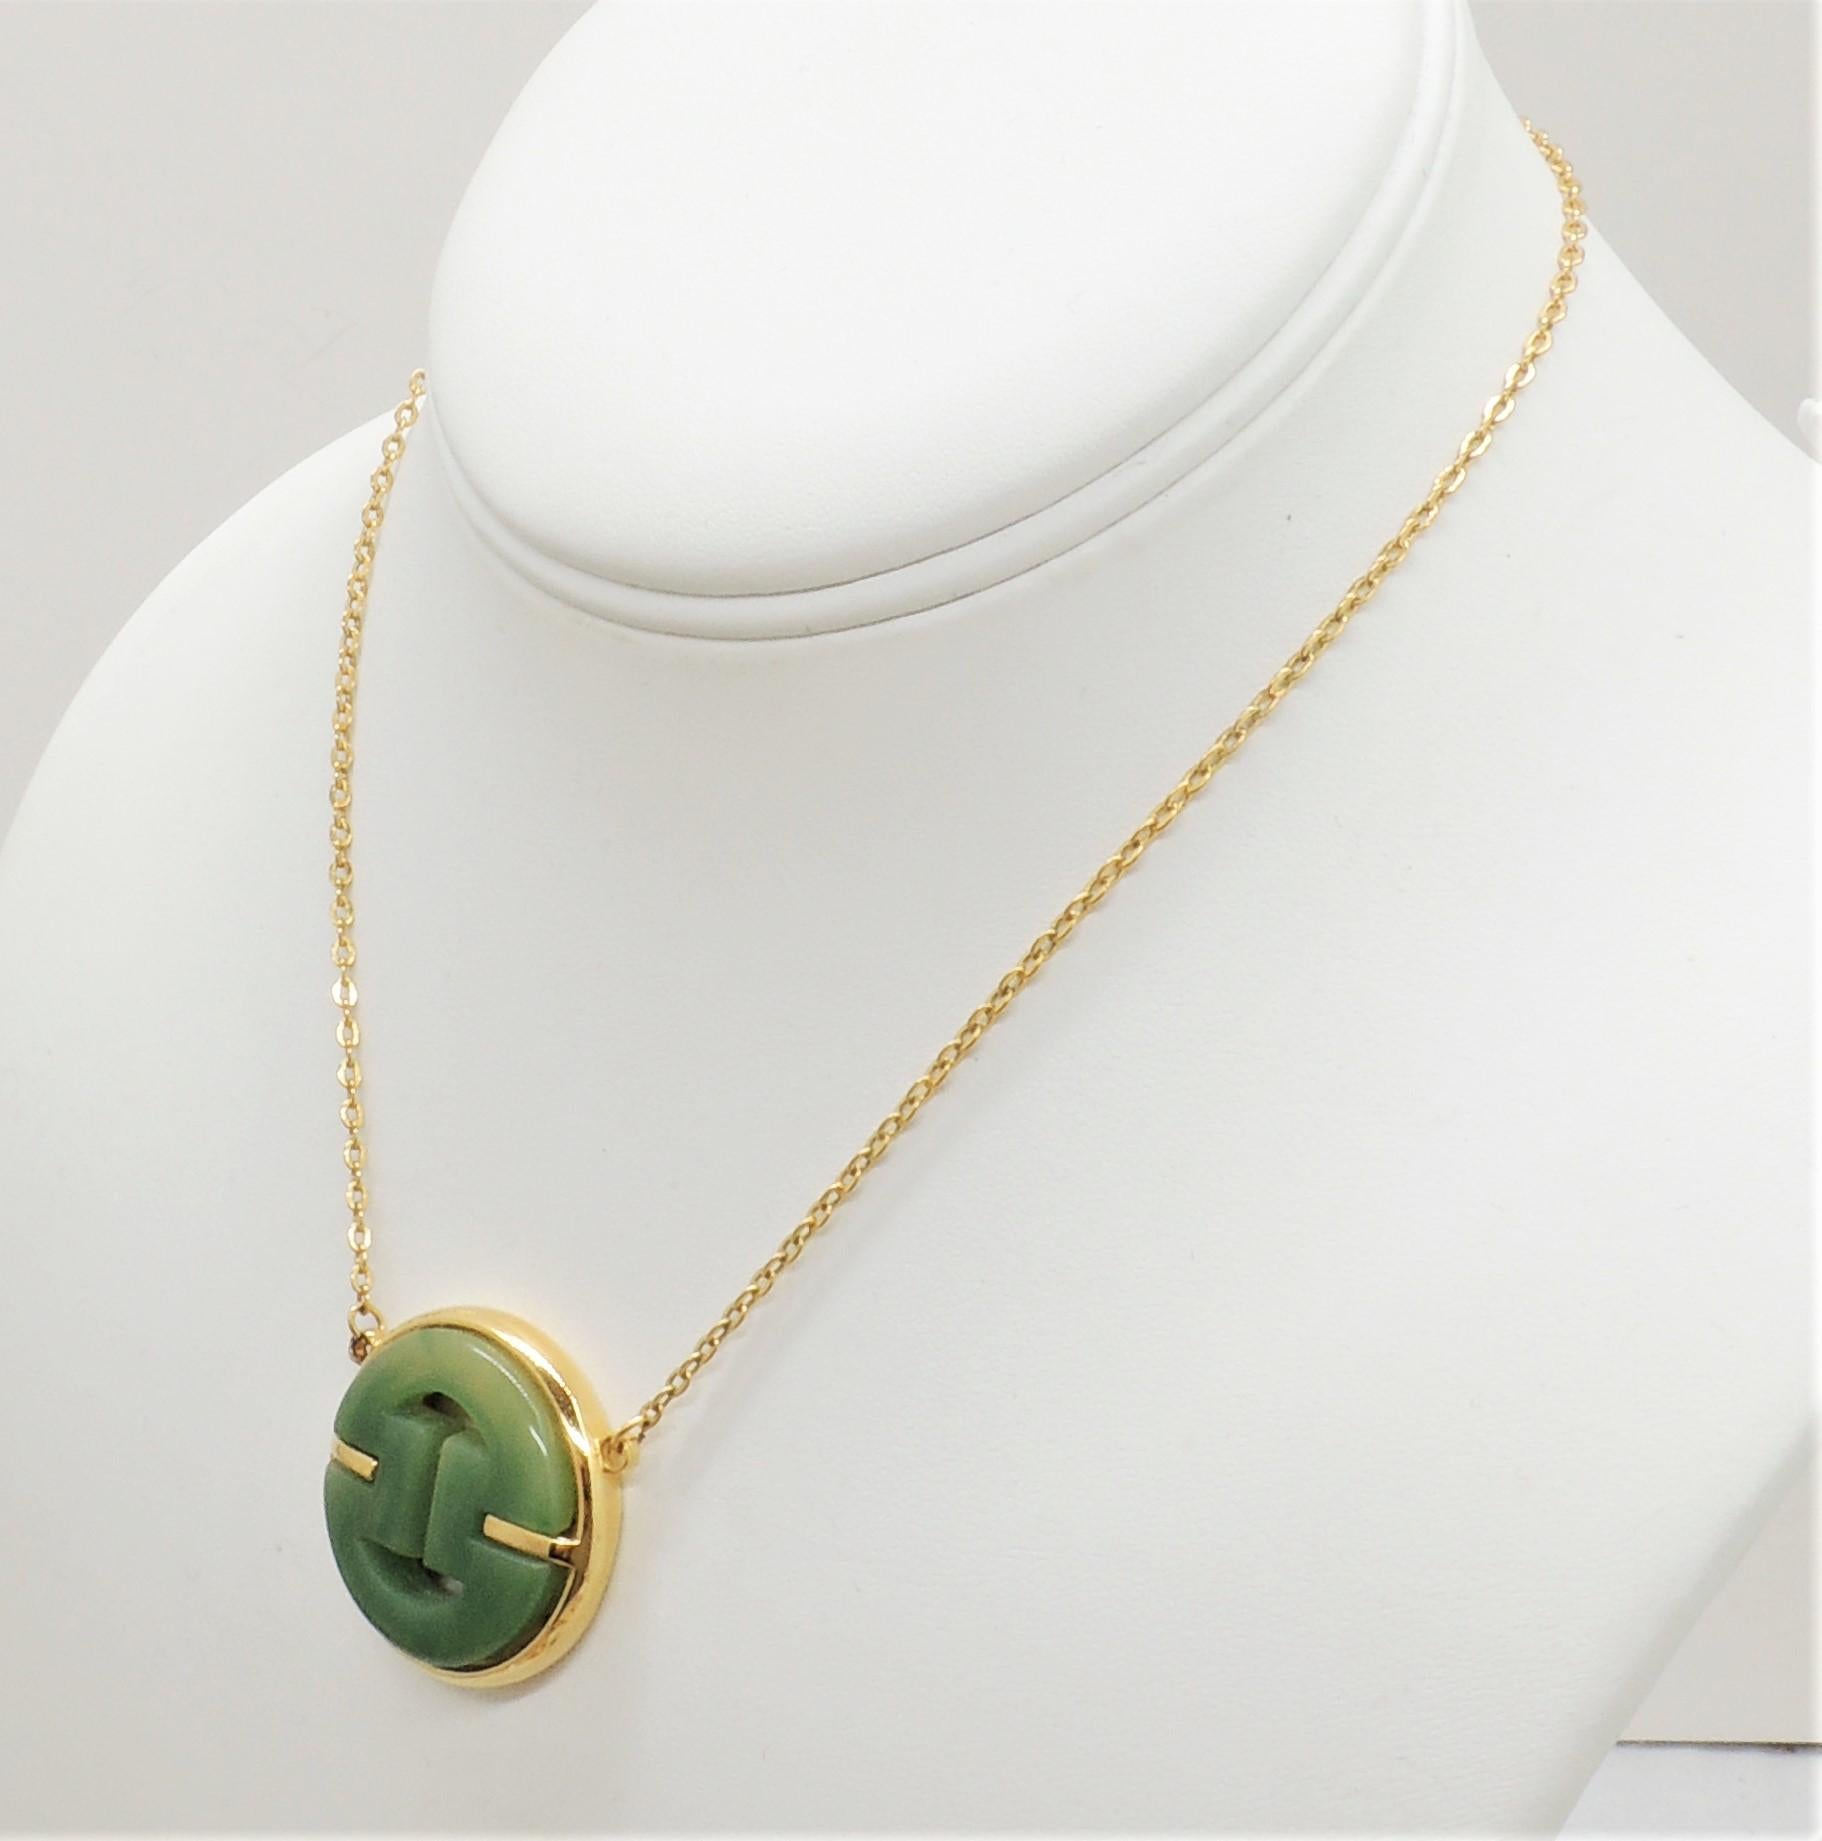 Vintage Signed Givenchy Goldtone Faux-Jade Pendant Necklace, 1977 In Excellent Condition For Sale In Easton, PA